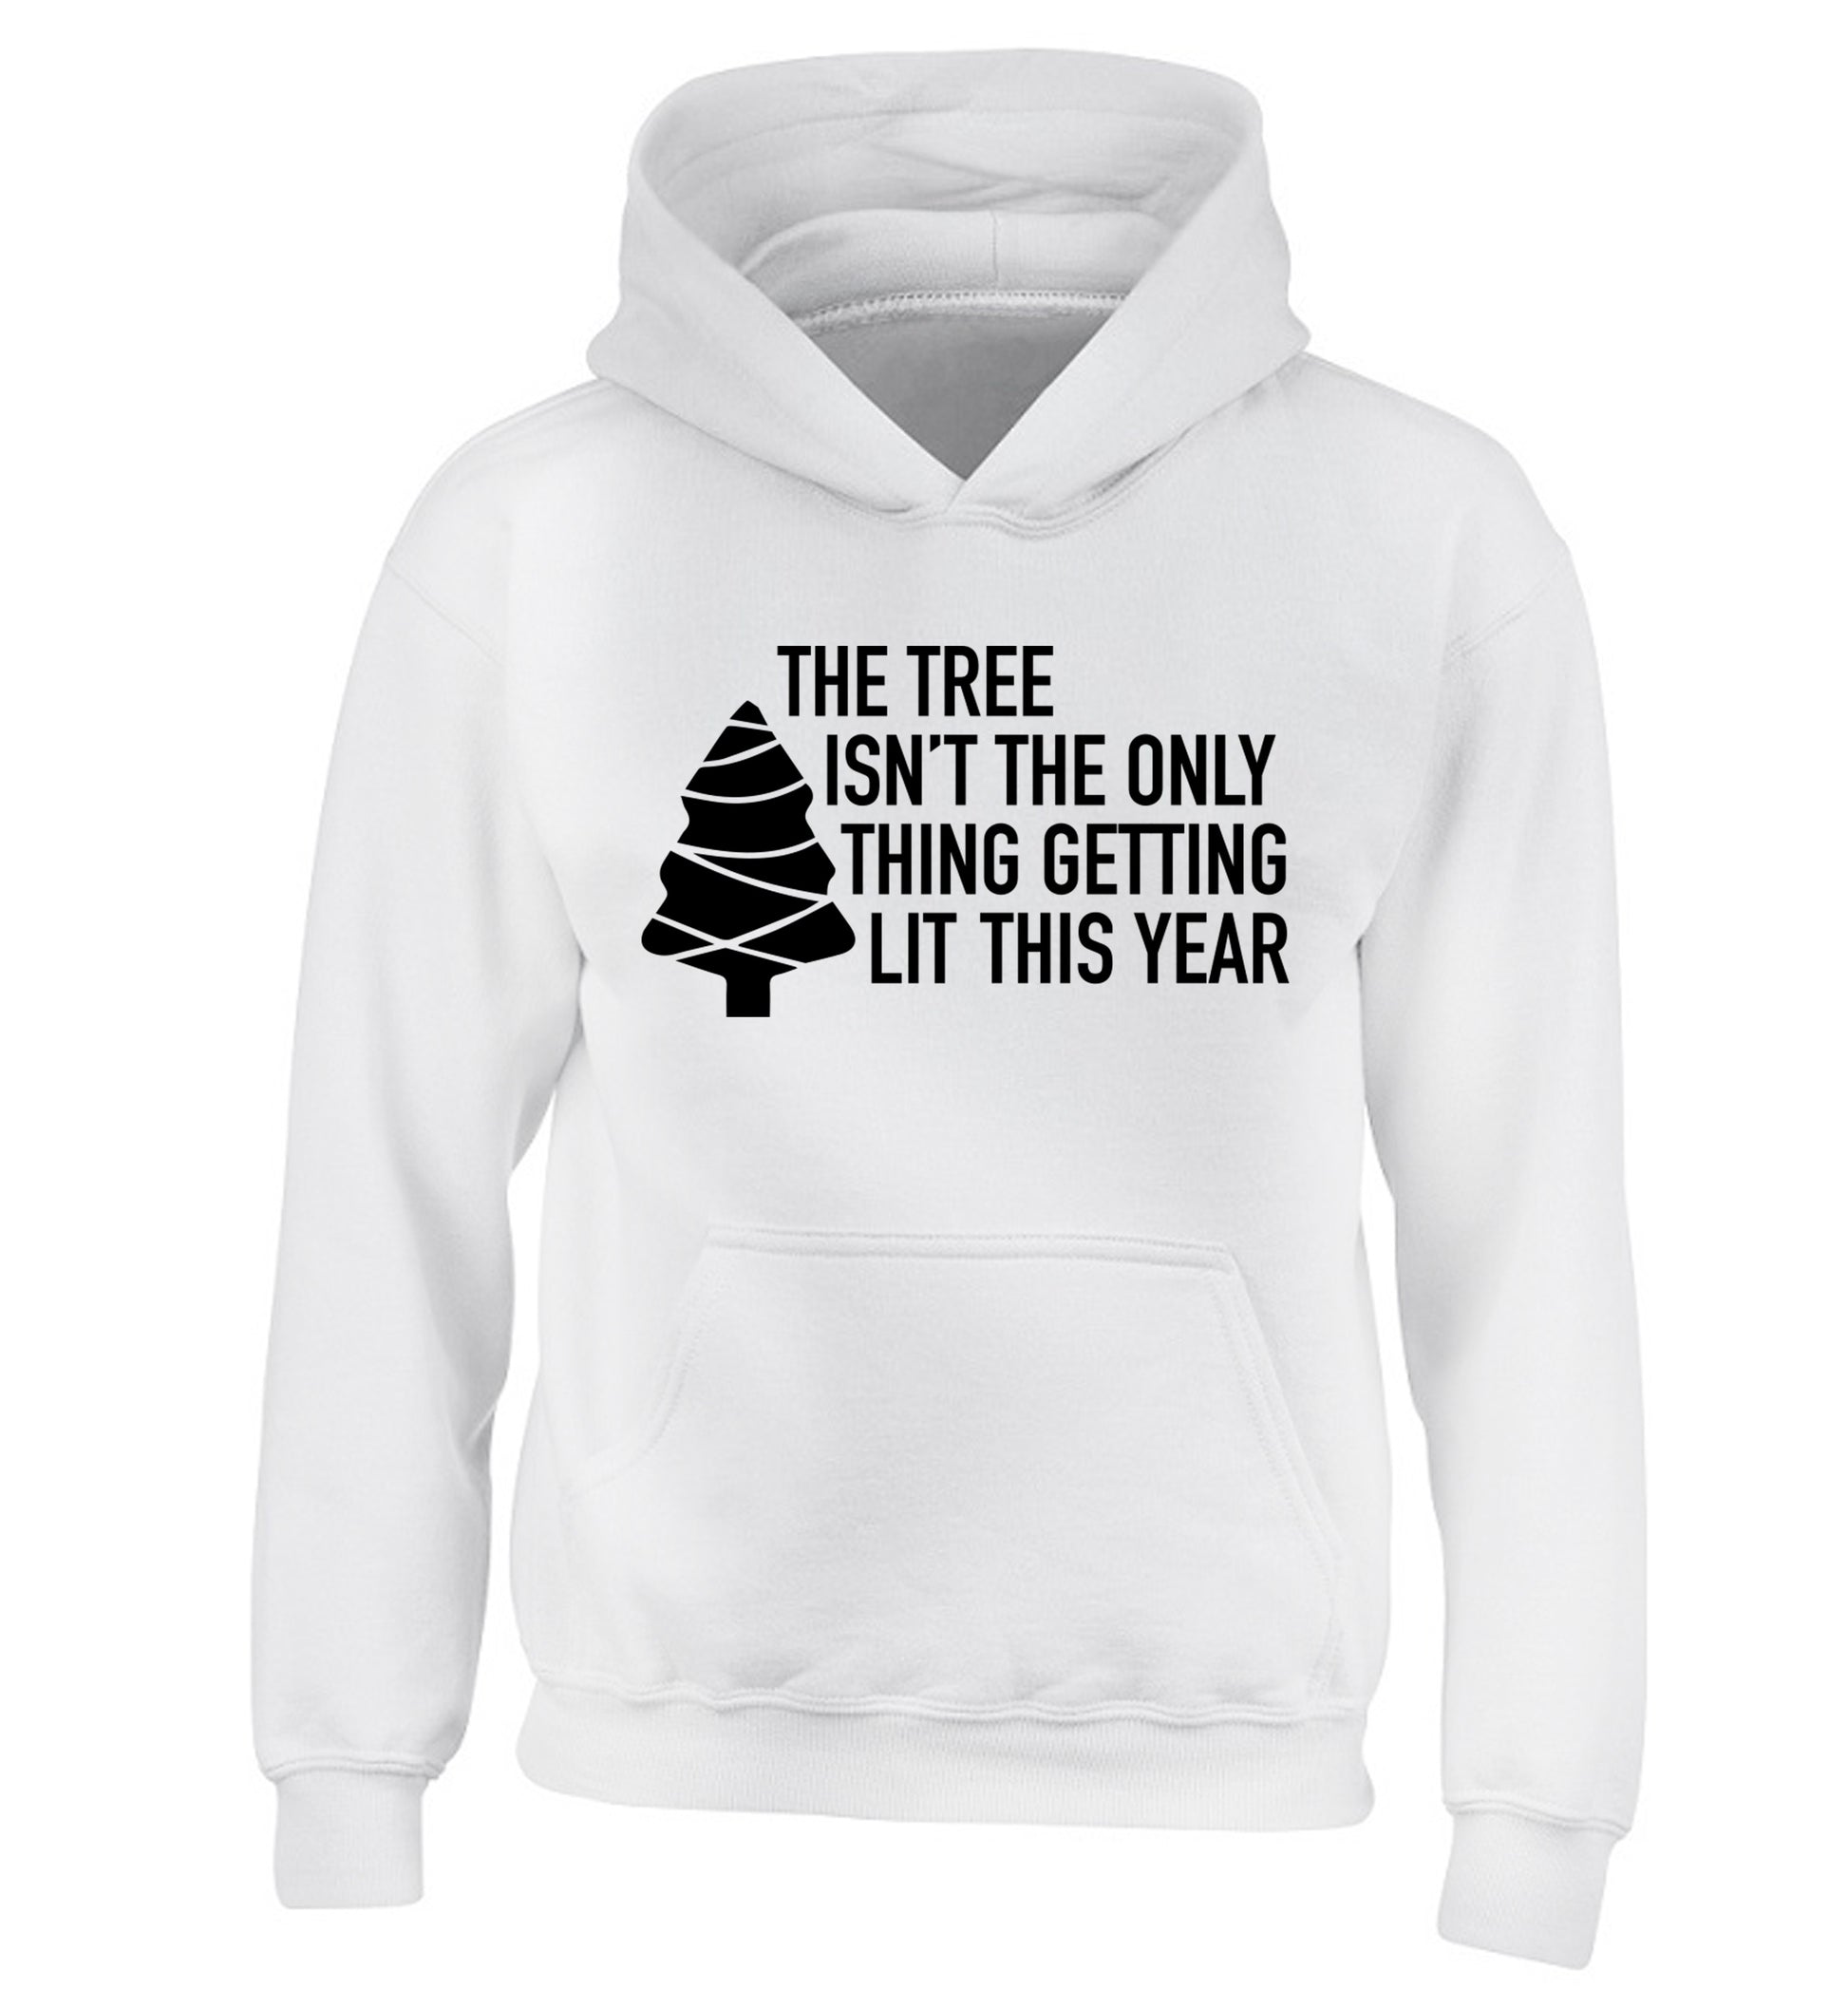 The tree isn't the only thing getting lit this year children's white hoodie 12-14 Years